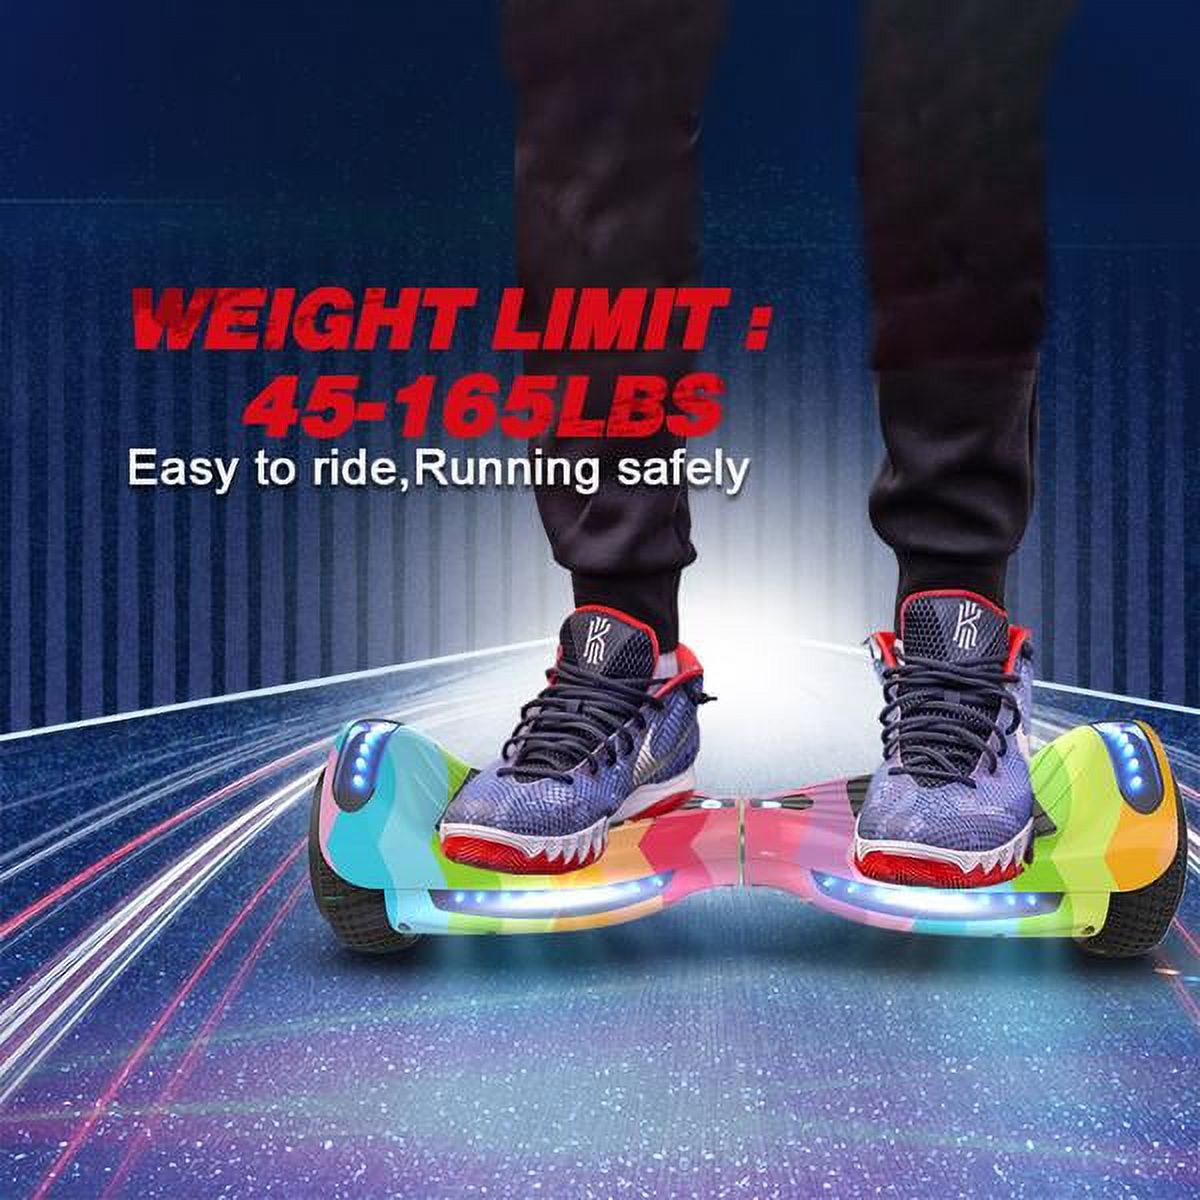 Flash Wheel Hoverboard 6.5" Bluetooth Speaker with LED Light Self Balancing Wheel Electric Scooter, Rainbow Wave - image 5 of 8